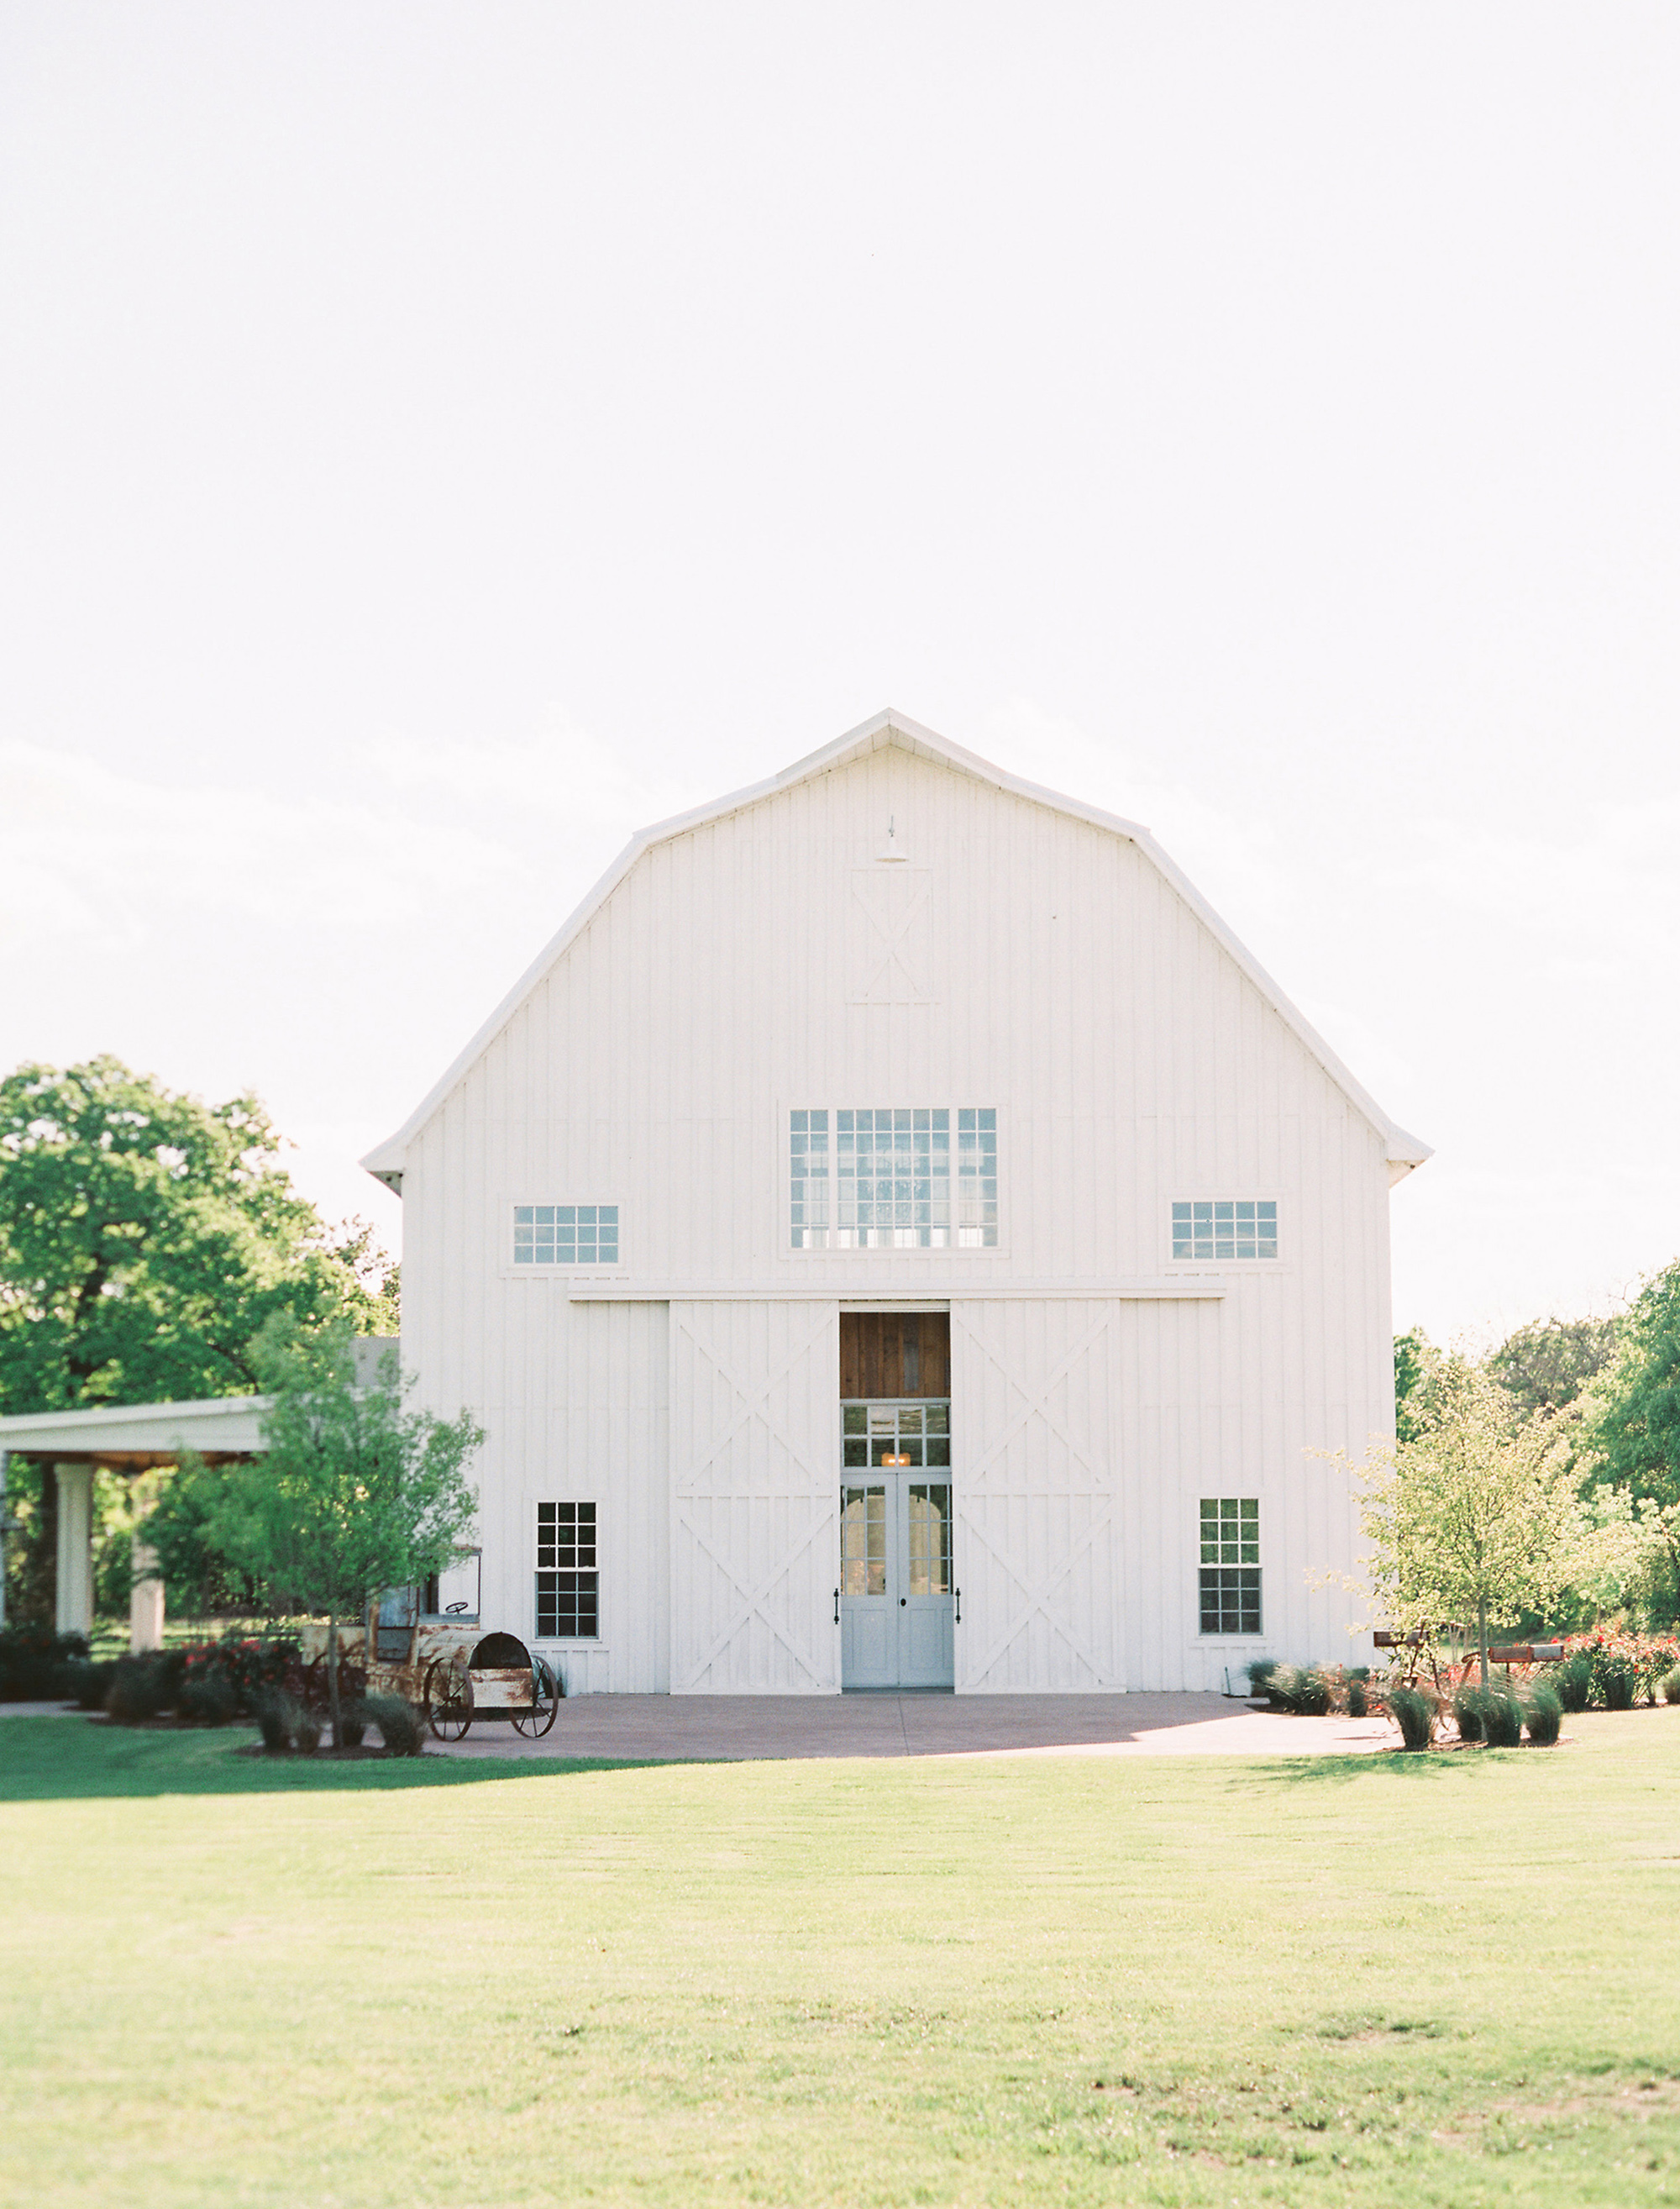 Exterview of the White Sparrow Barn wedding venue